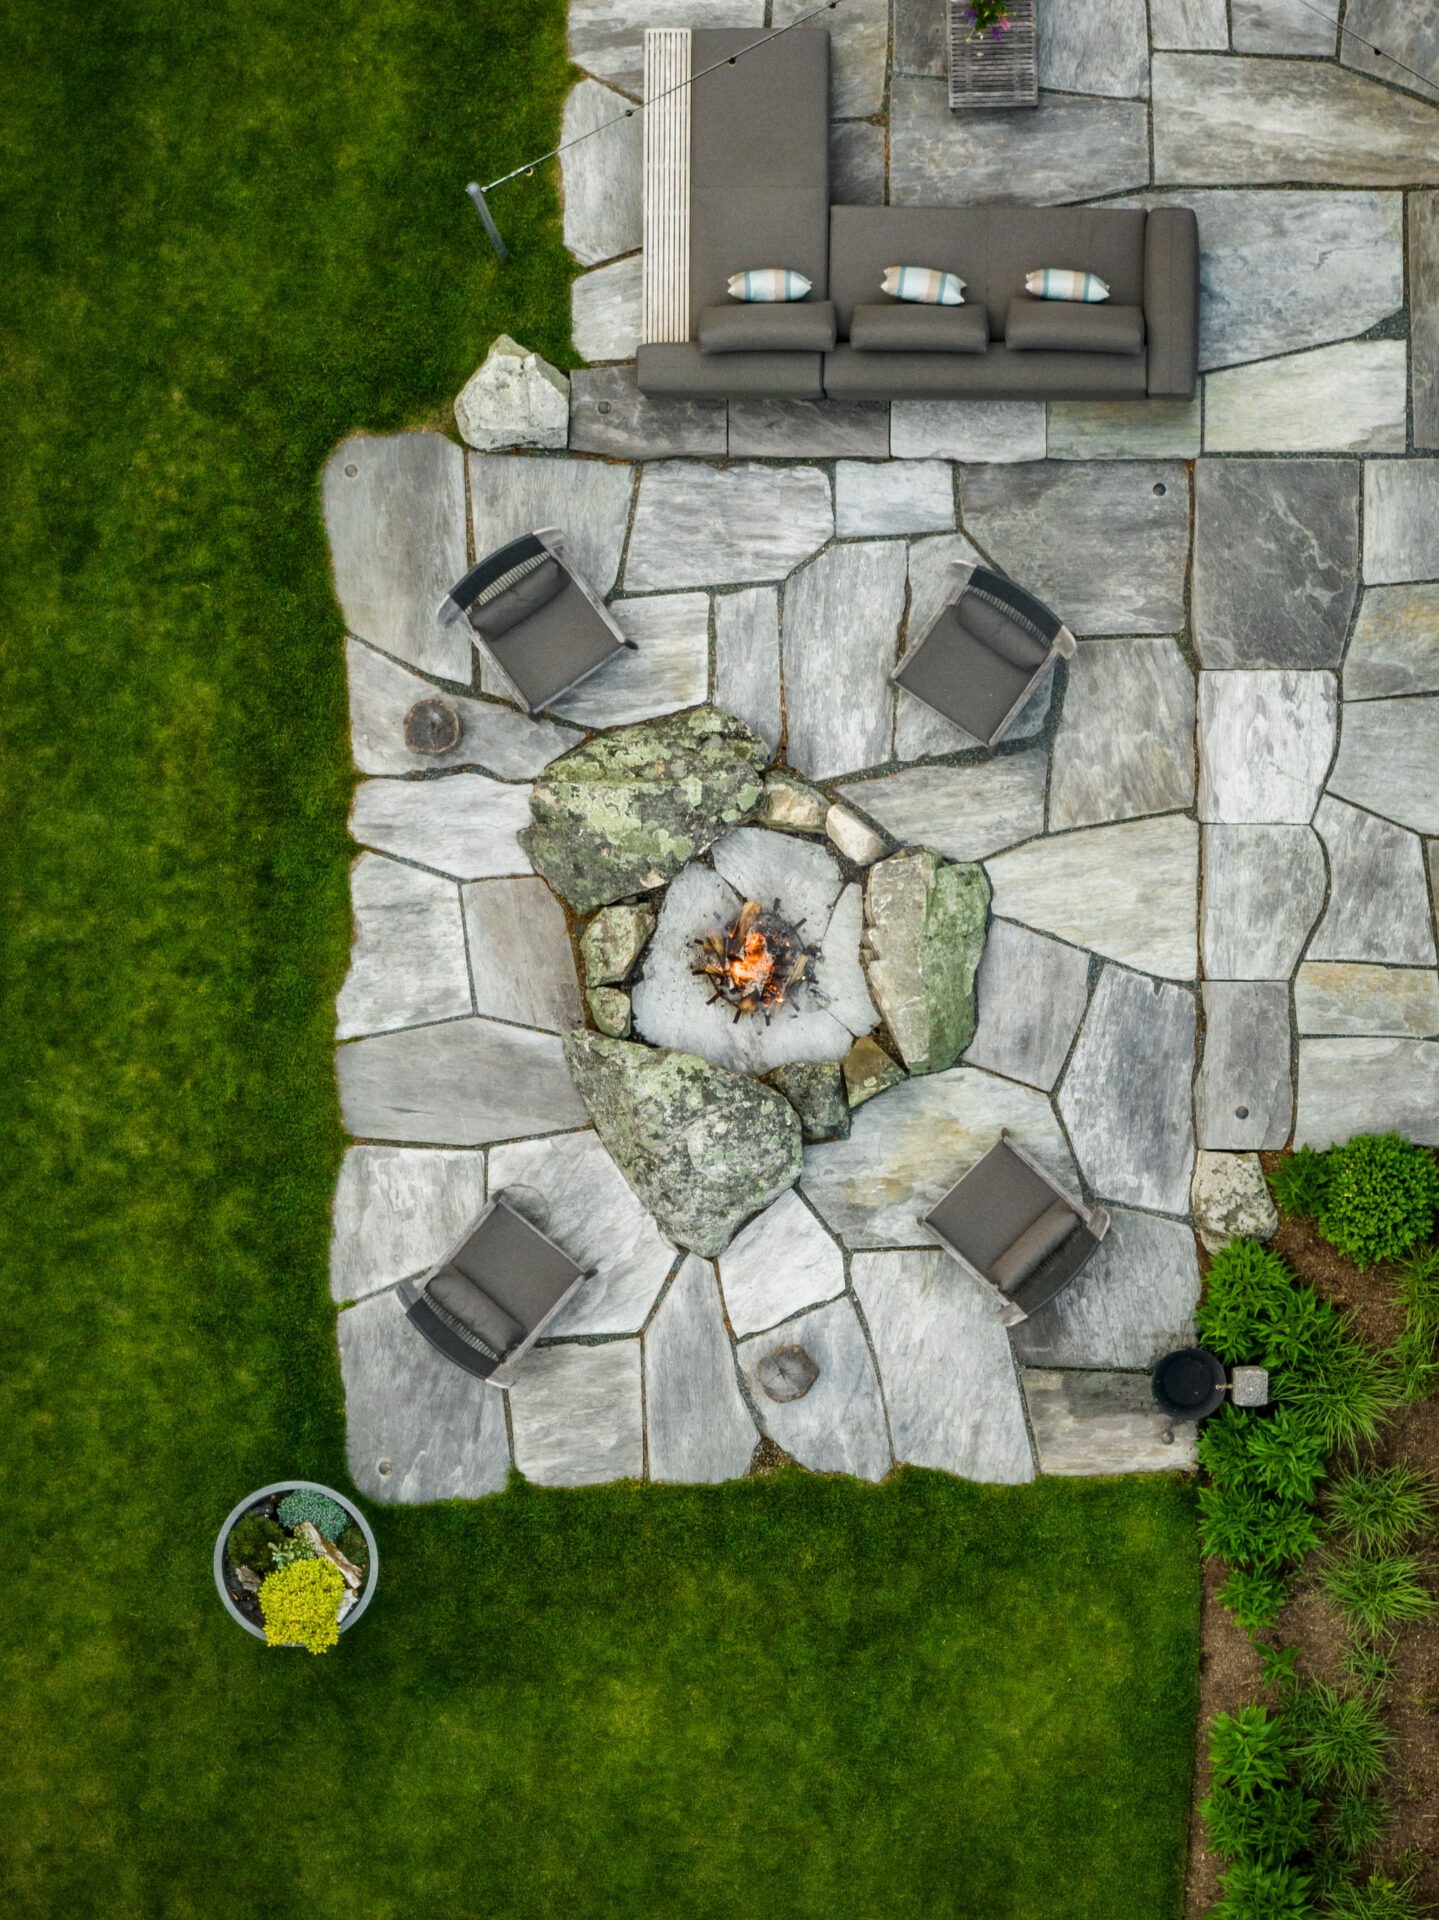 An aerial view of an outdoor stone patio with a fire pit in the center surrounded by chairs, adjacent to a neatly trimmed lawn.